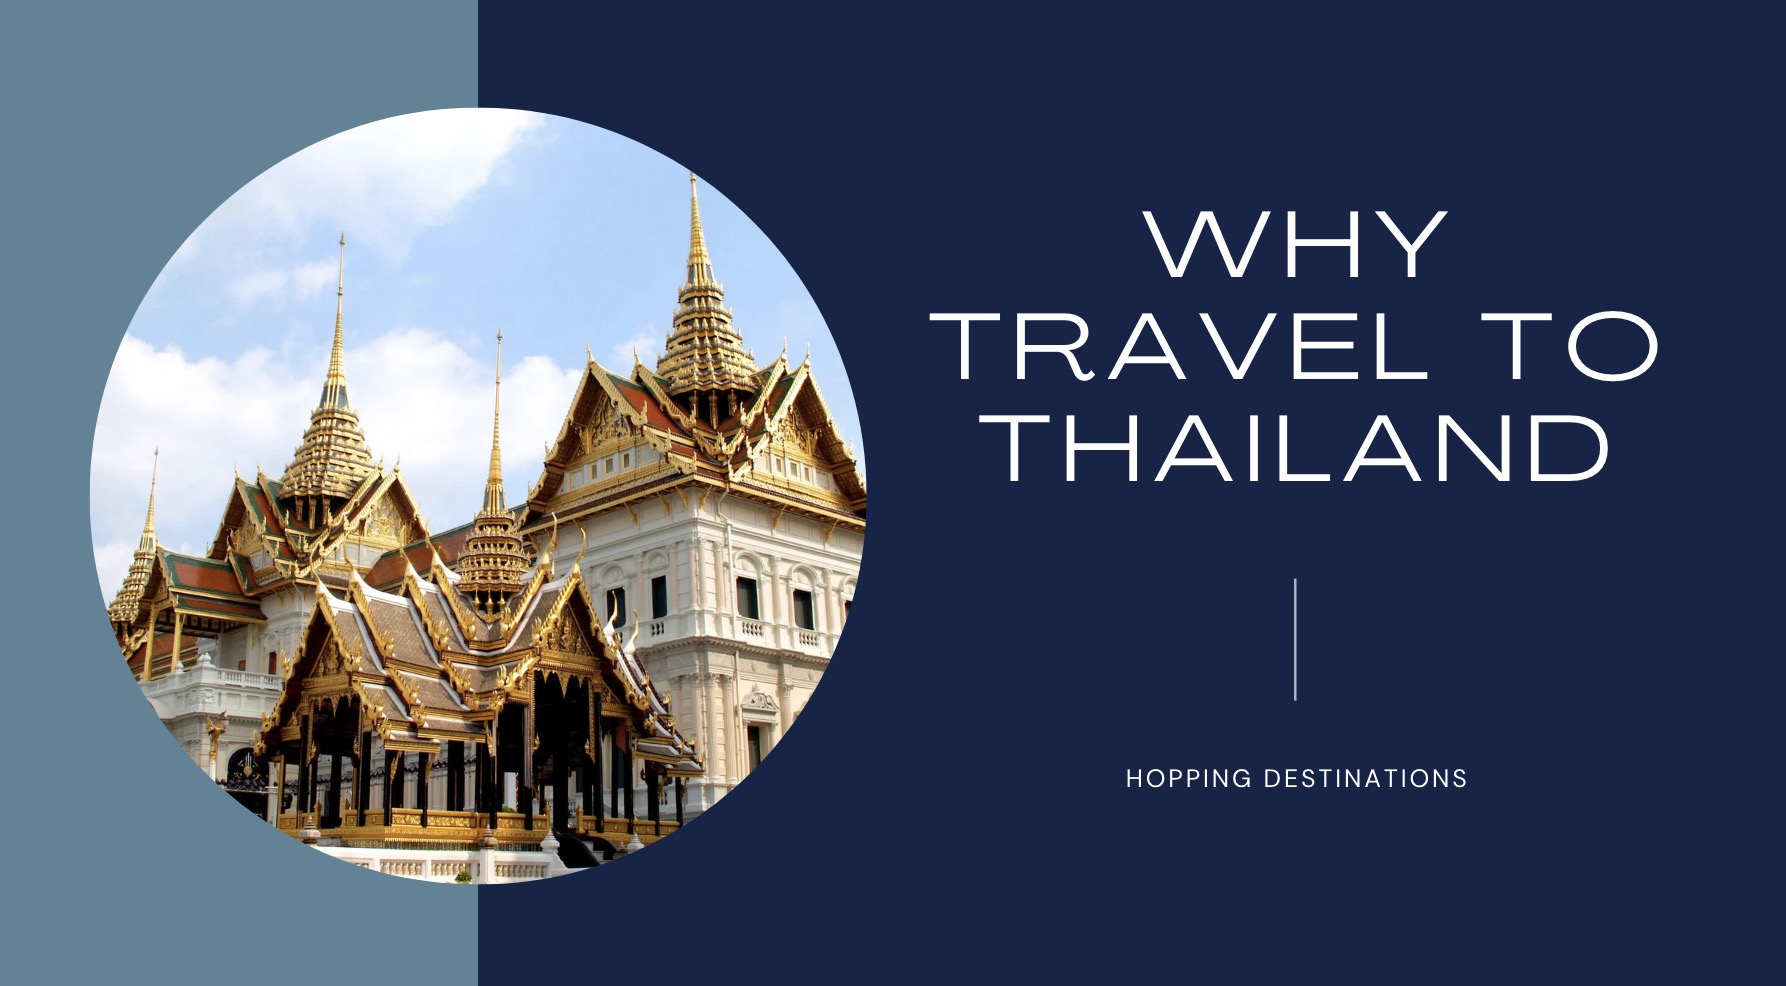 Why Travel to Thailand?